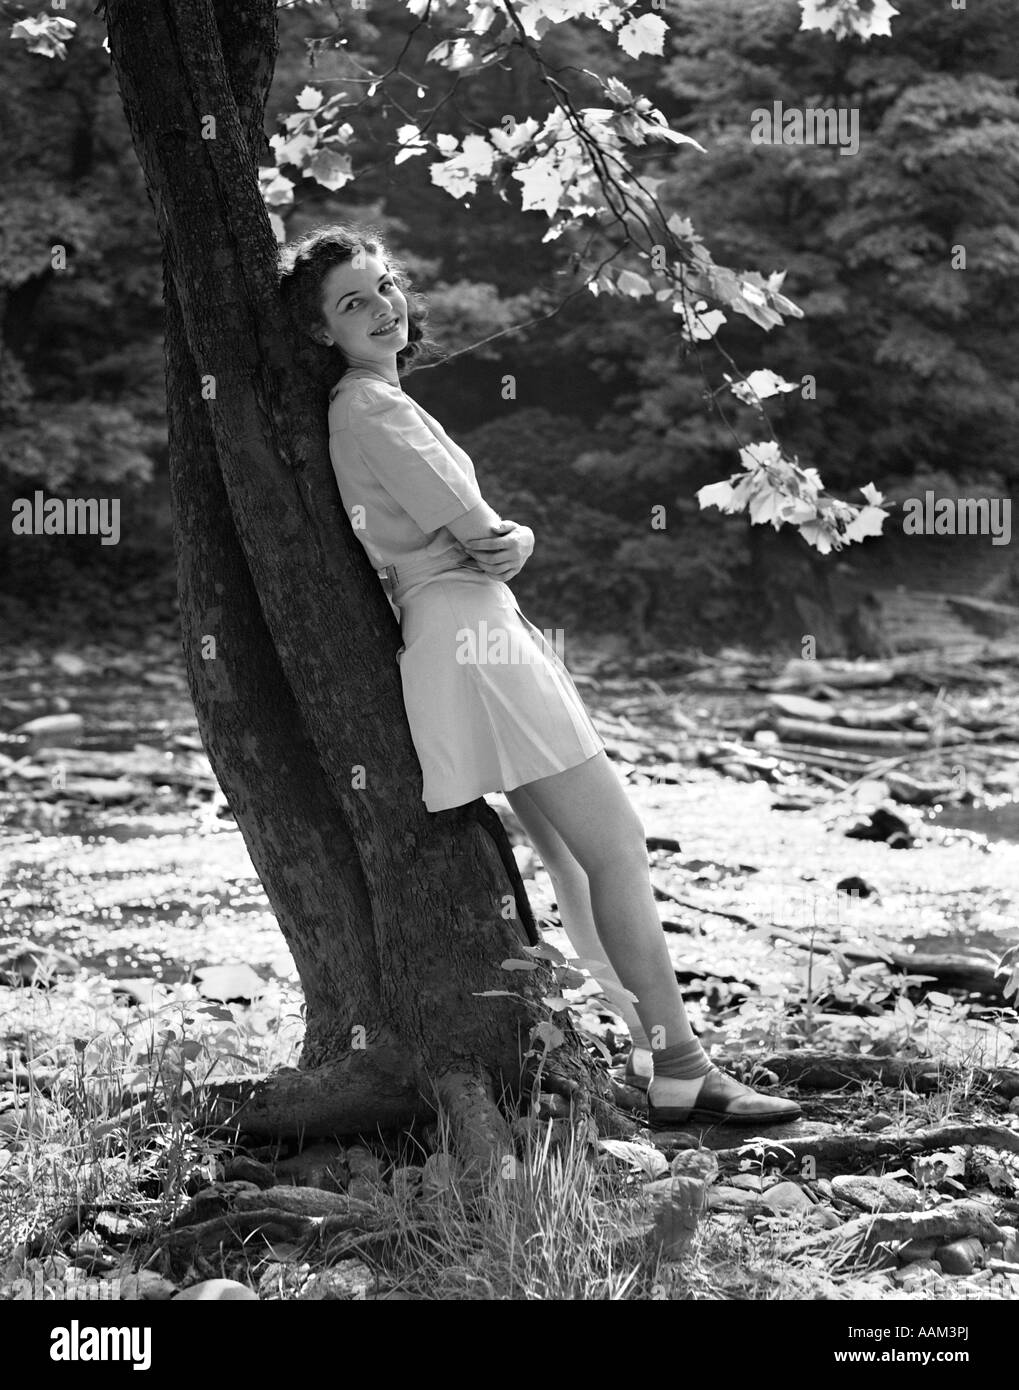 1940s SMILING YOUNG WOMAN WEARING SHORT SKIRT AND SADDLE SHOES LEANING AGAINST TREE BY STREAM Stock Photo